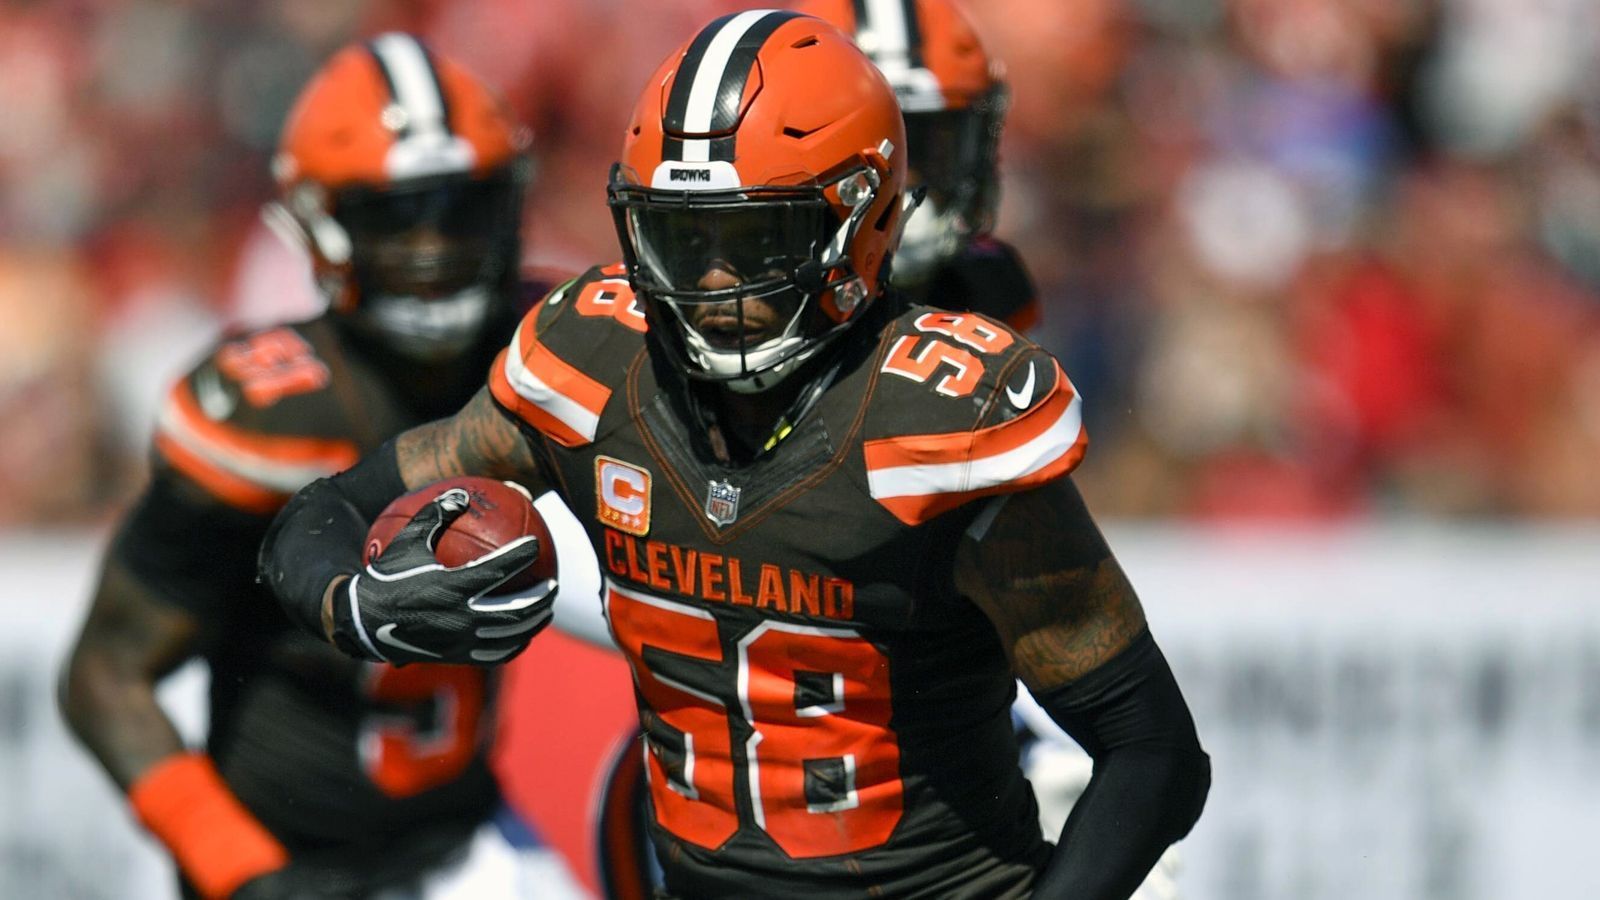 
                <strong>Cleveland Browns: Christian Kirksey</strong><br>
                Position: Linebacker
              